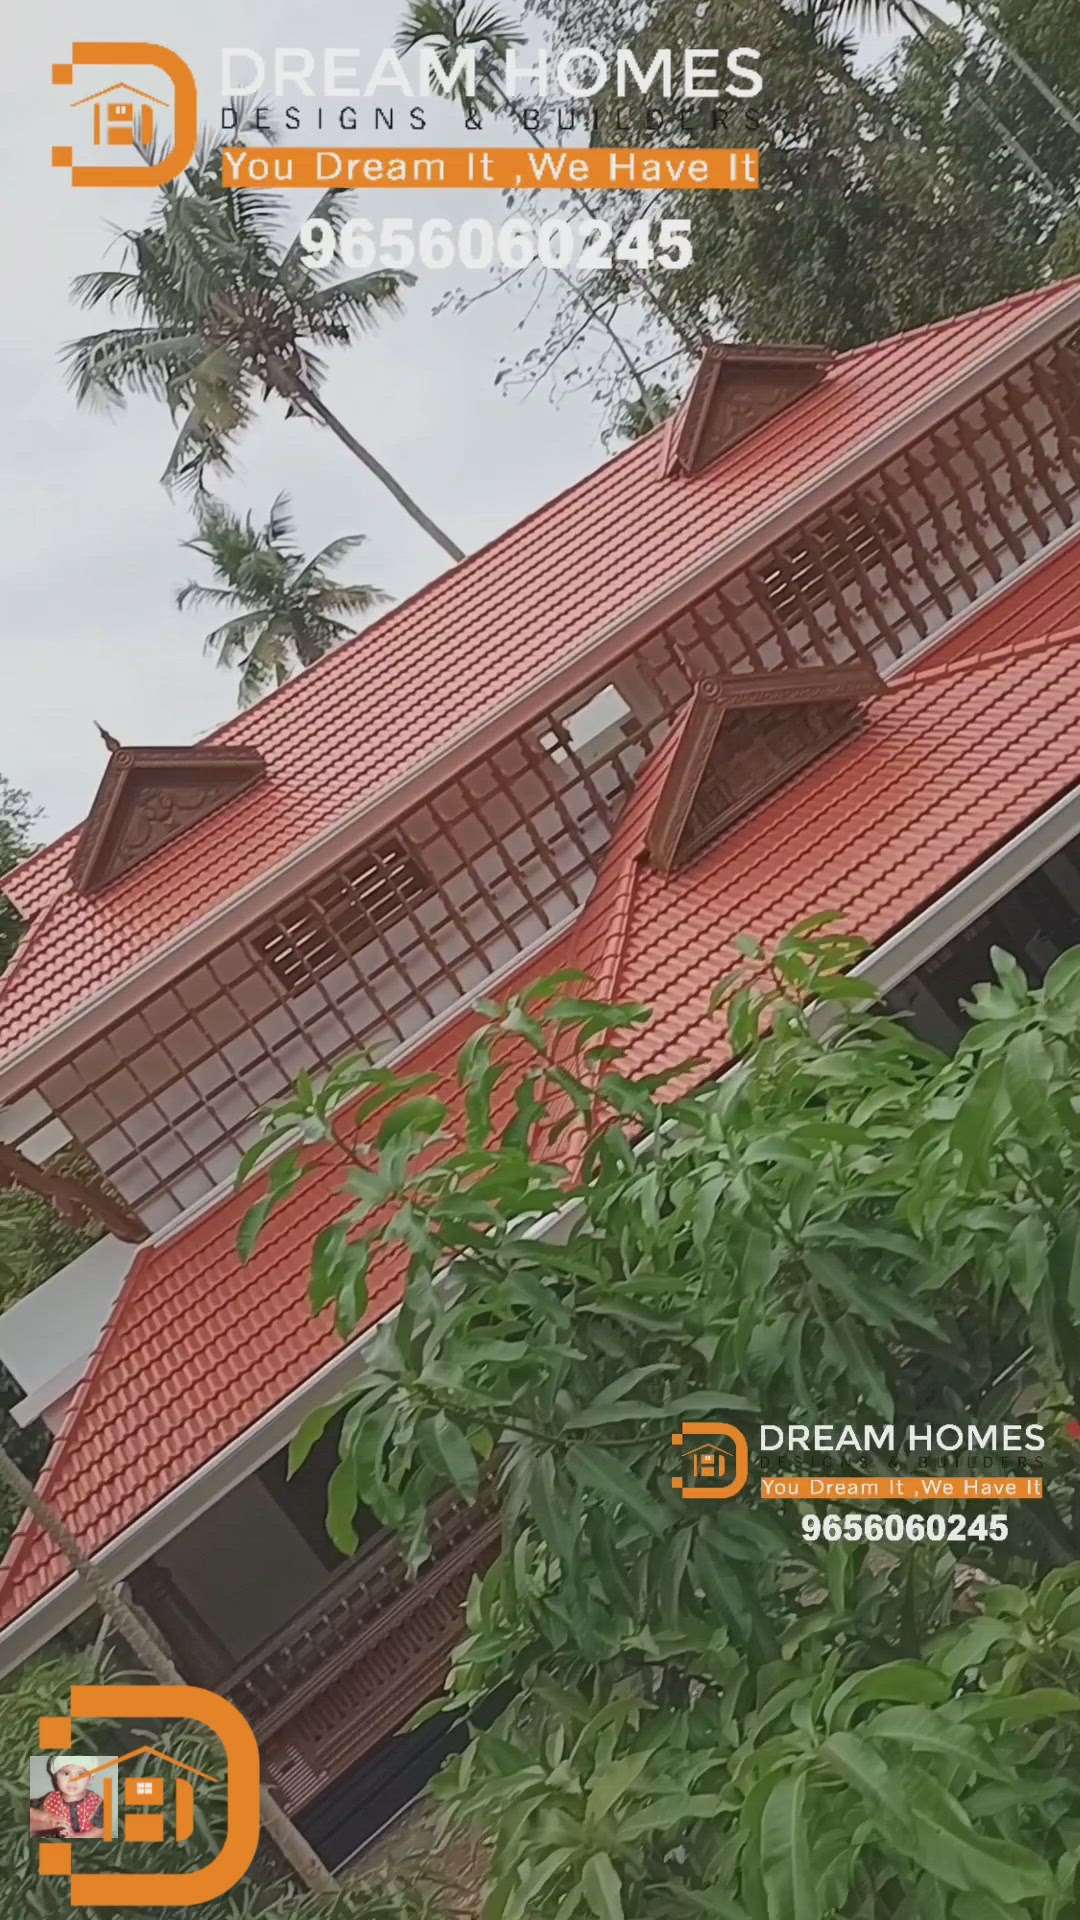 "DREAM HOMES DESIGNS & BUILDERS"
            
You Dream It, We Have It'

       "Kerala's No 1 Architect for Traditional Homes"
"നിങ്ങളുടെ സ്വപ്നഭവനം സുന്ദരമാക്കു ഡ്രീം ഹോംസിലൂടെ 💚

We are presenting you our new completed project.
We strongly believe in your dreams and you strongly believe in our architecture.
Here is the finest example for that mix-up :-

#traditionalhome #traditional

No Compromise on Quality, Sincerity & Efficiency.
For more info

9656060245
7902453187

www.dreamhomesbuilders.com

https://youtu.be/rRGp27_rjfc